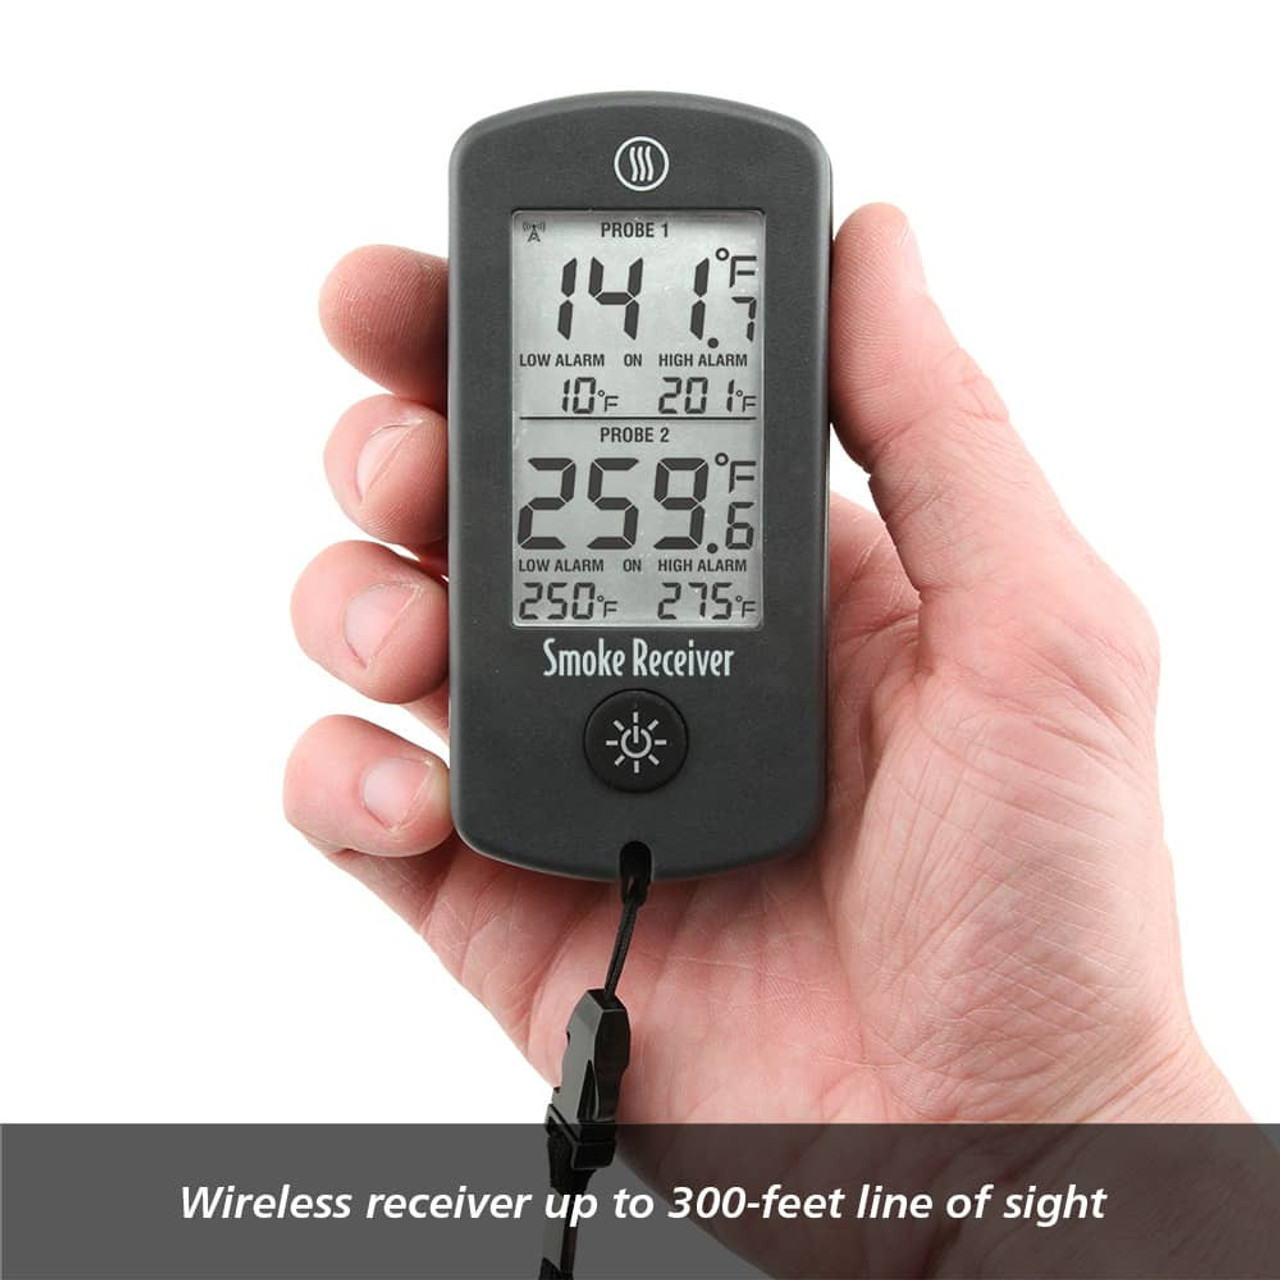 ThermoWorks Signals 4-Channel BBQ Alarm Thermometer with Wi-Fi and